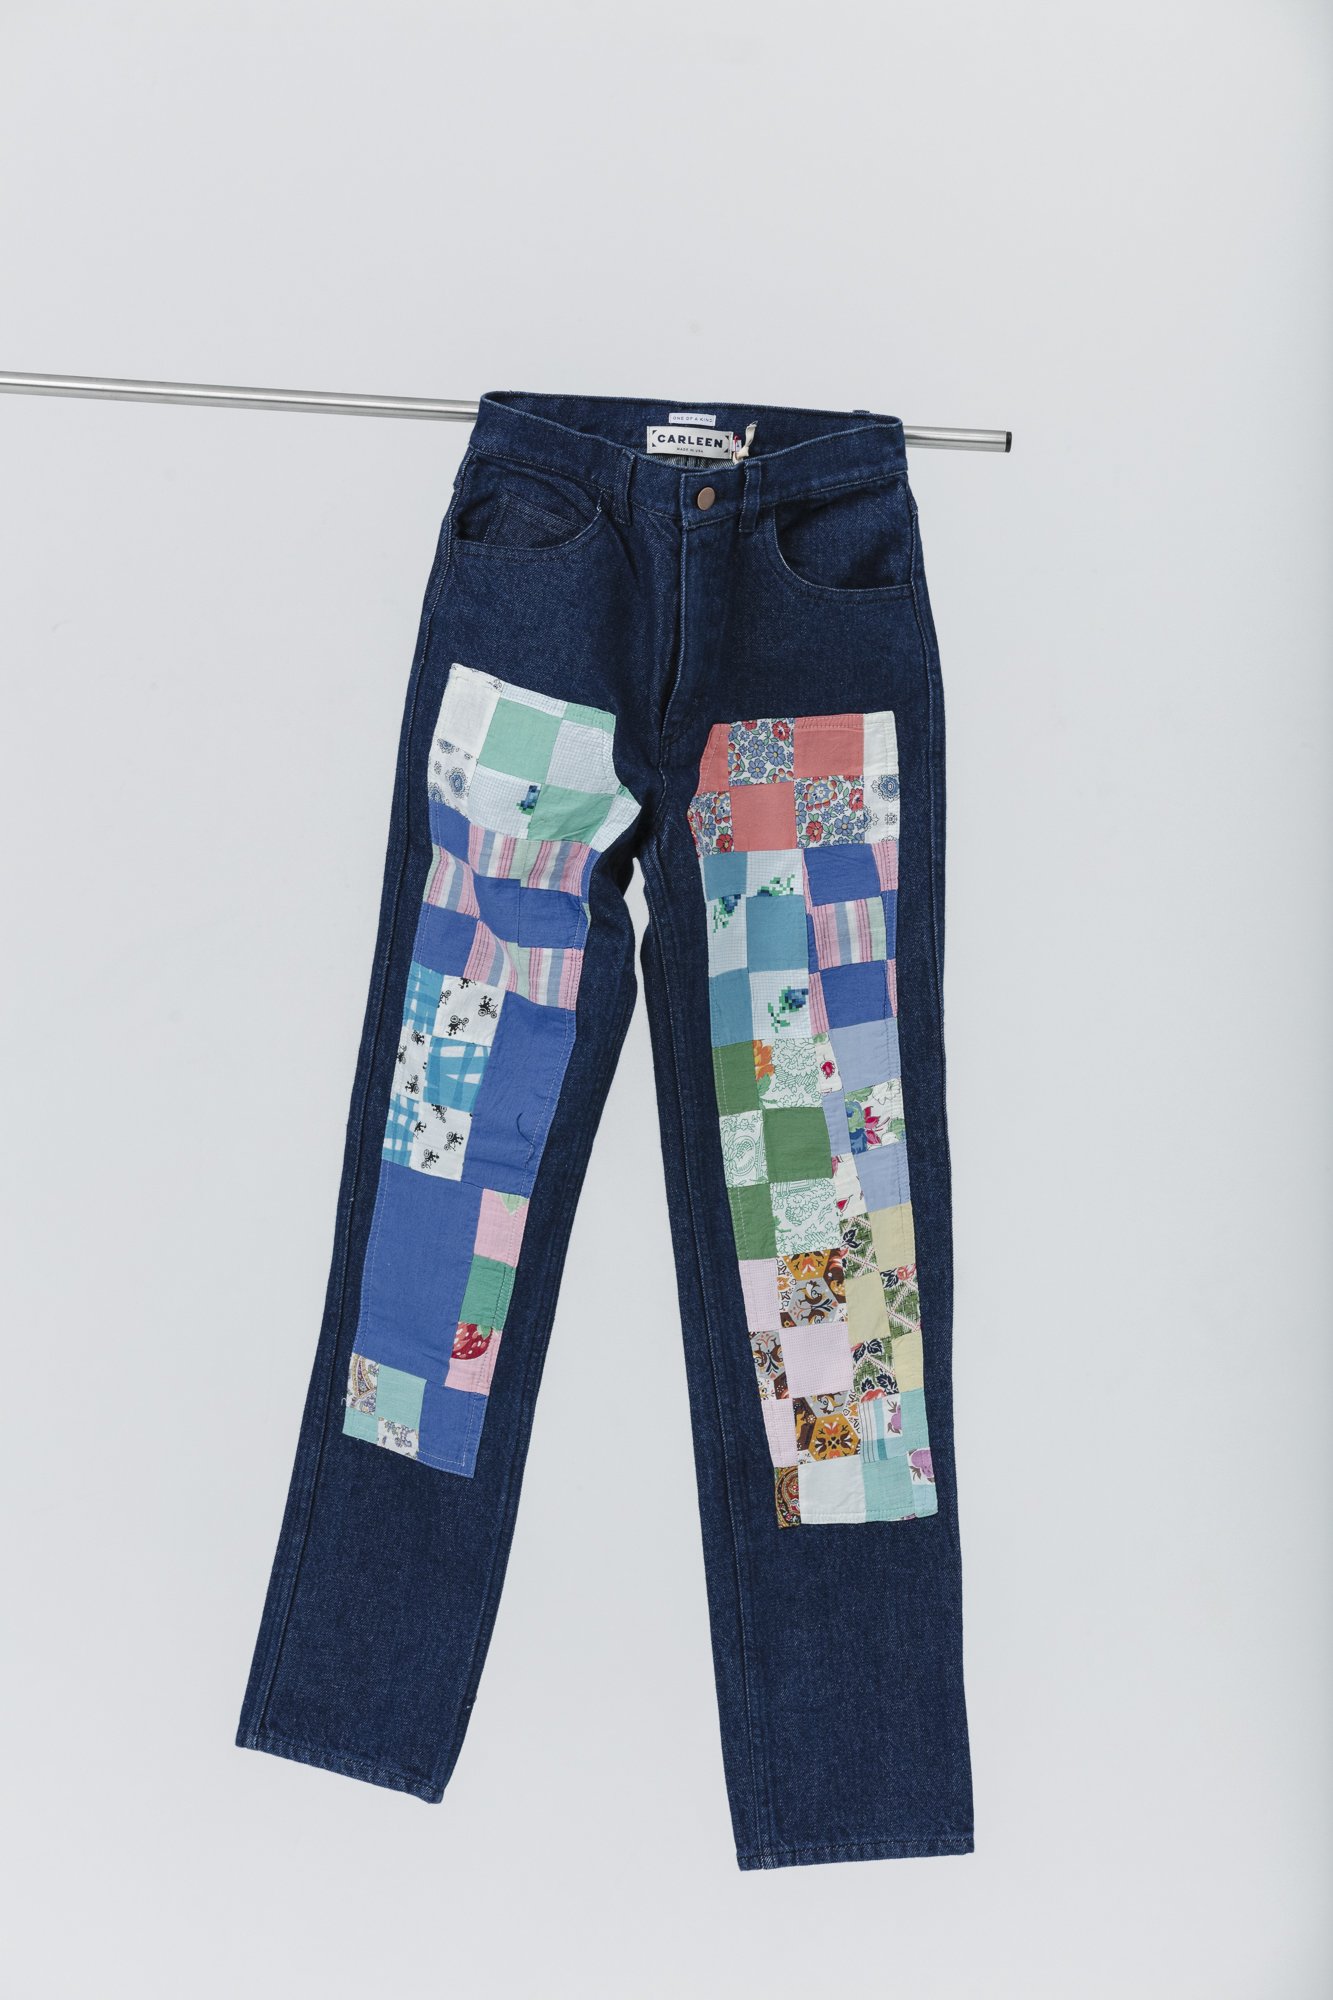 Rsq Patchwork Jeans - Multi-Colored - 29